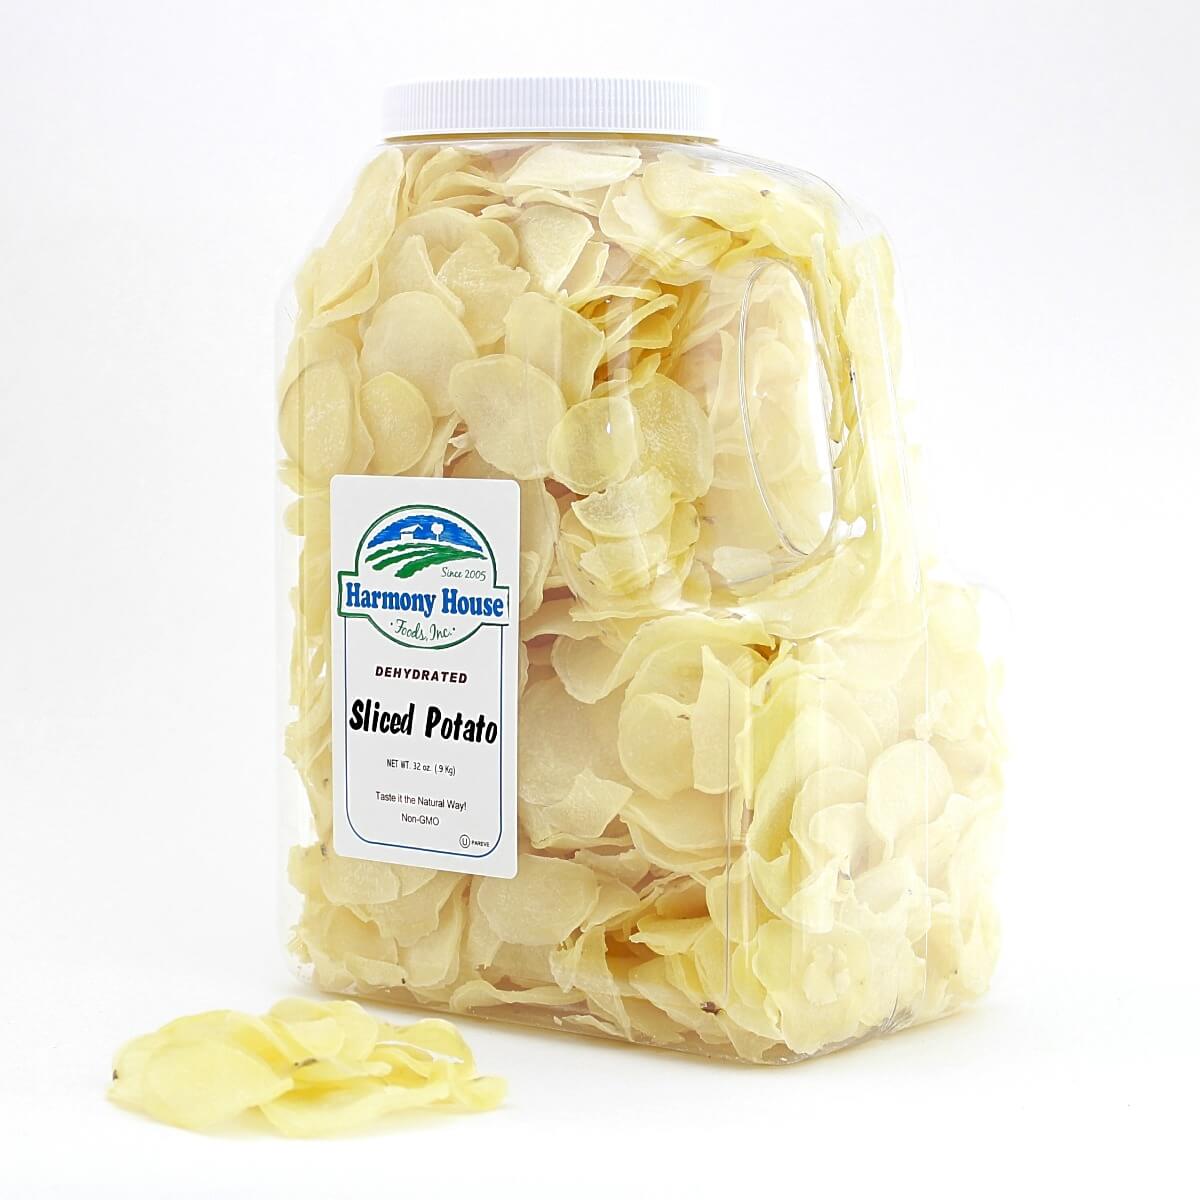 A jar of potato chips sitting on a white surface with Harmony House Dried Potatoes.